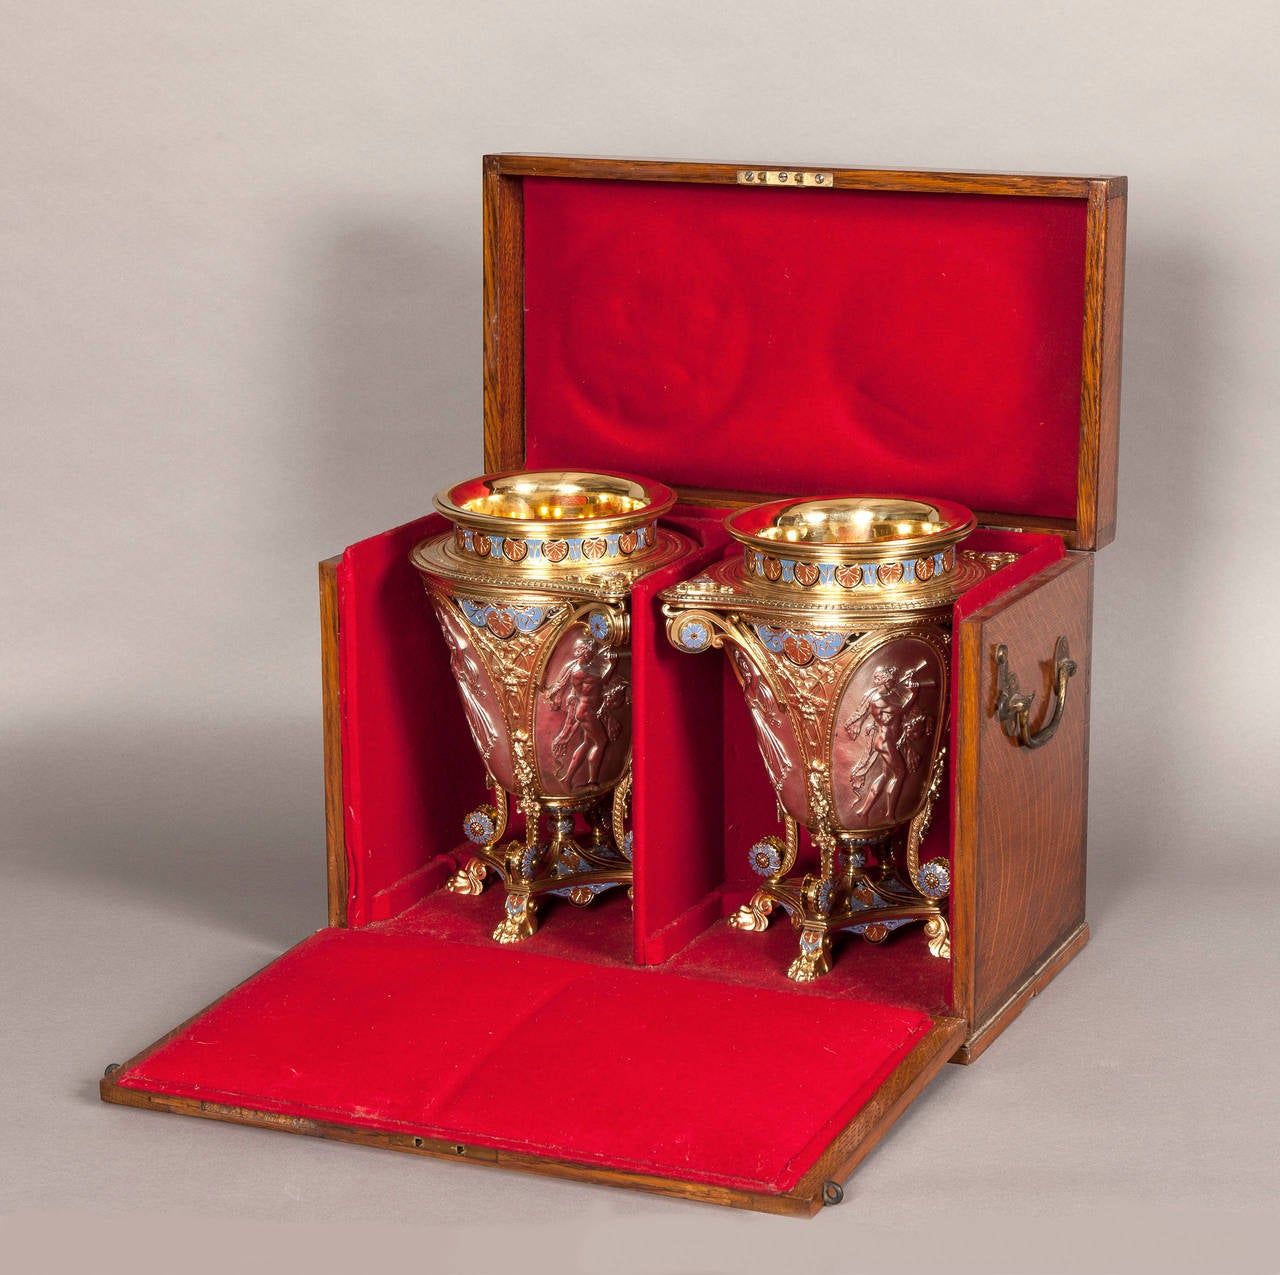 A Magnificent Pair of Parcel Gilt Silver & Enamelled Wine Coolers
From a dessert service exhibited at the 1862 Great Exhibition London
Being made by Elkington & Co

Designed in the ‘Graeco-Pompeian’ manner by A.A. Willms (see below); four claws